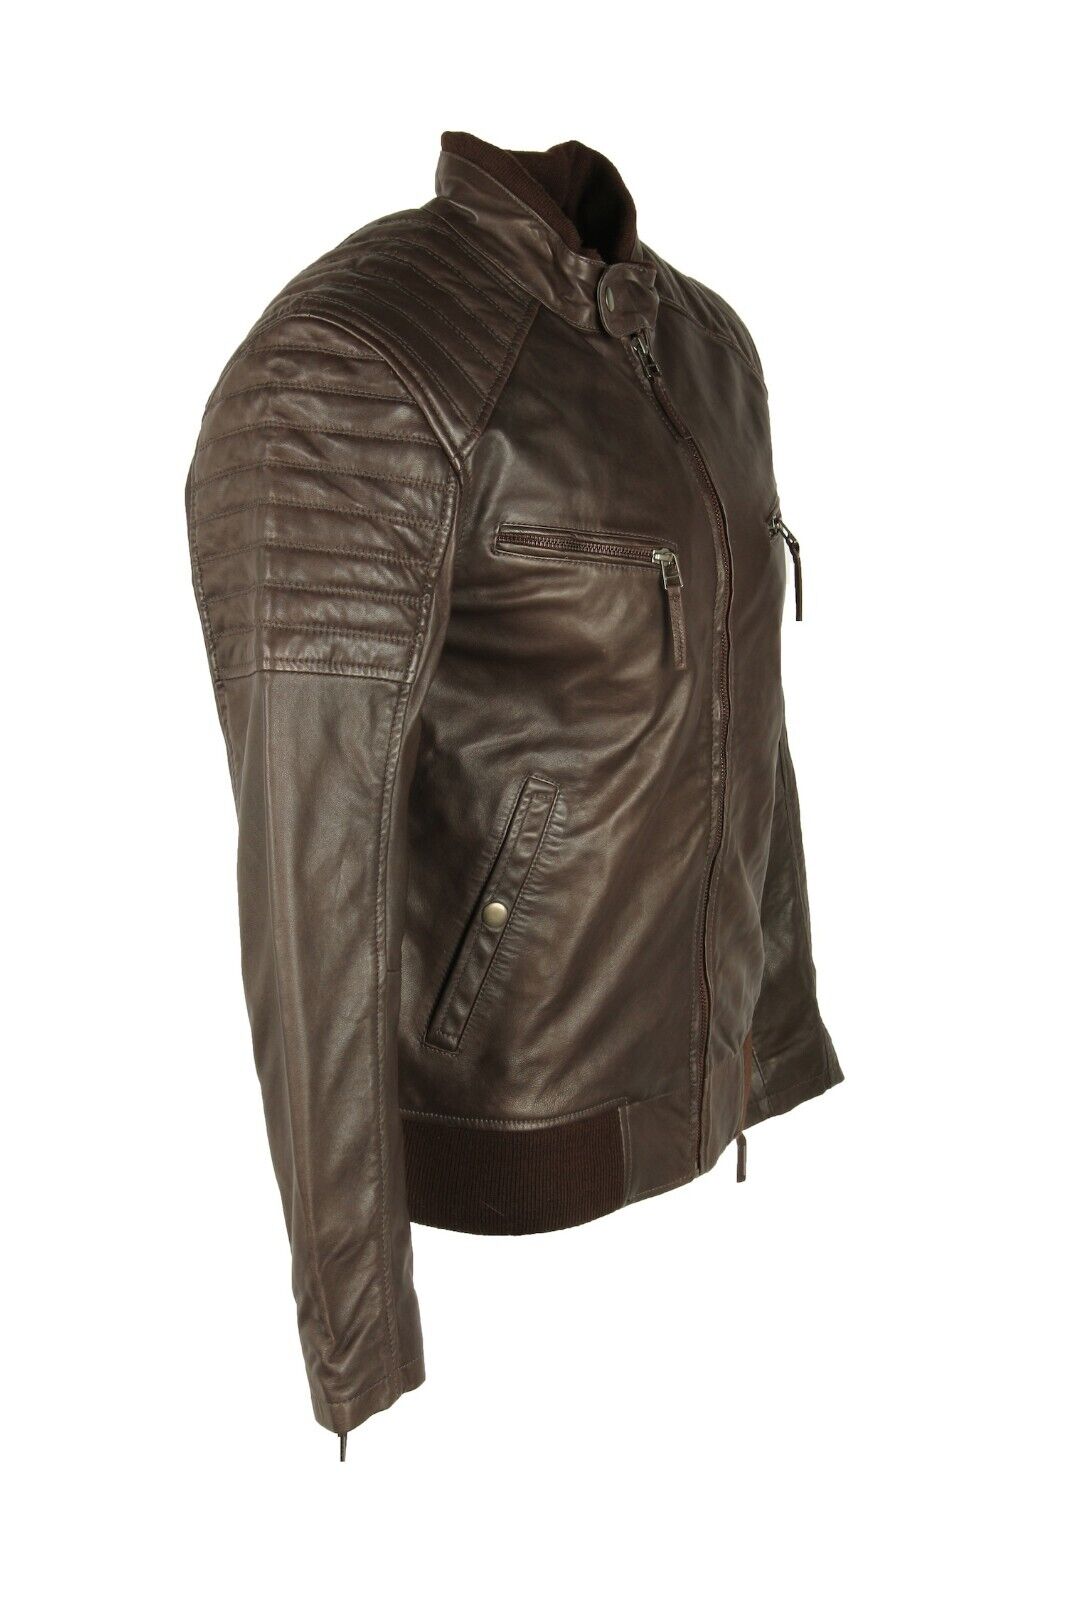 Real Leather Jacket Mens Bomber Biker Style, Brown S,M,L,XL Brand New ...